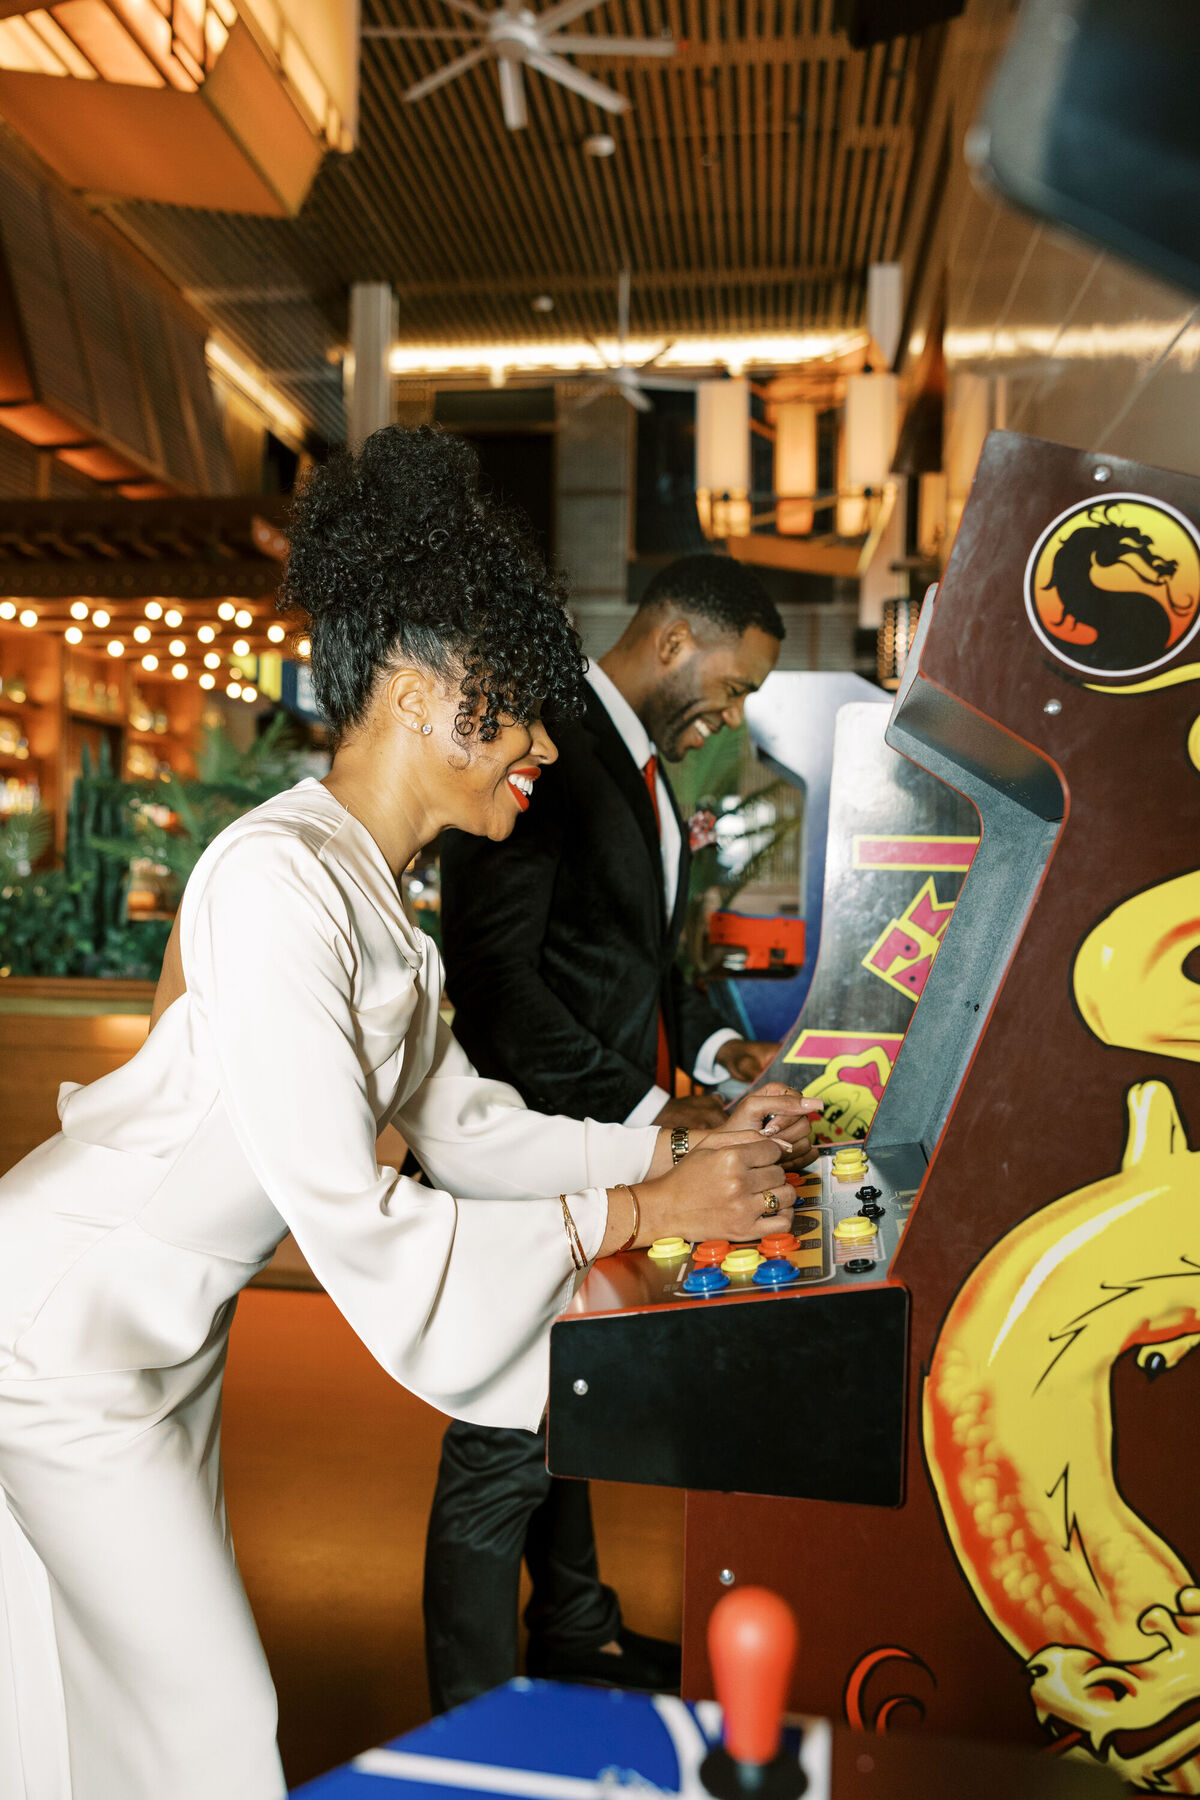 Bride and groom playing arcade games